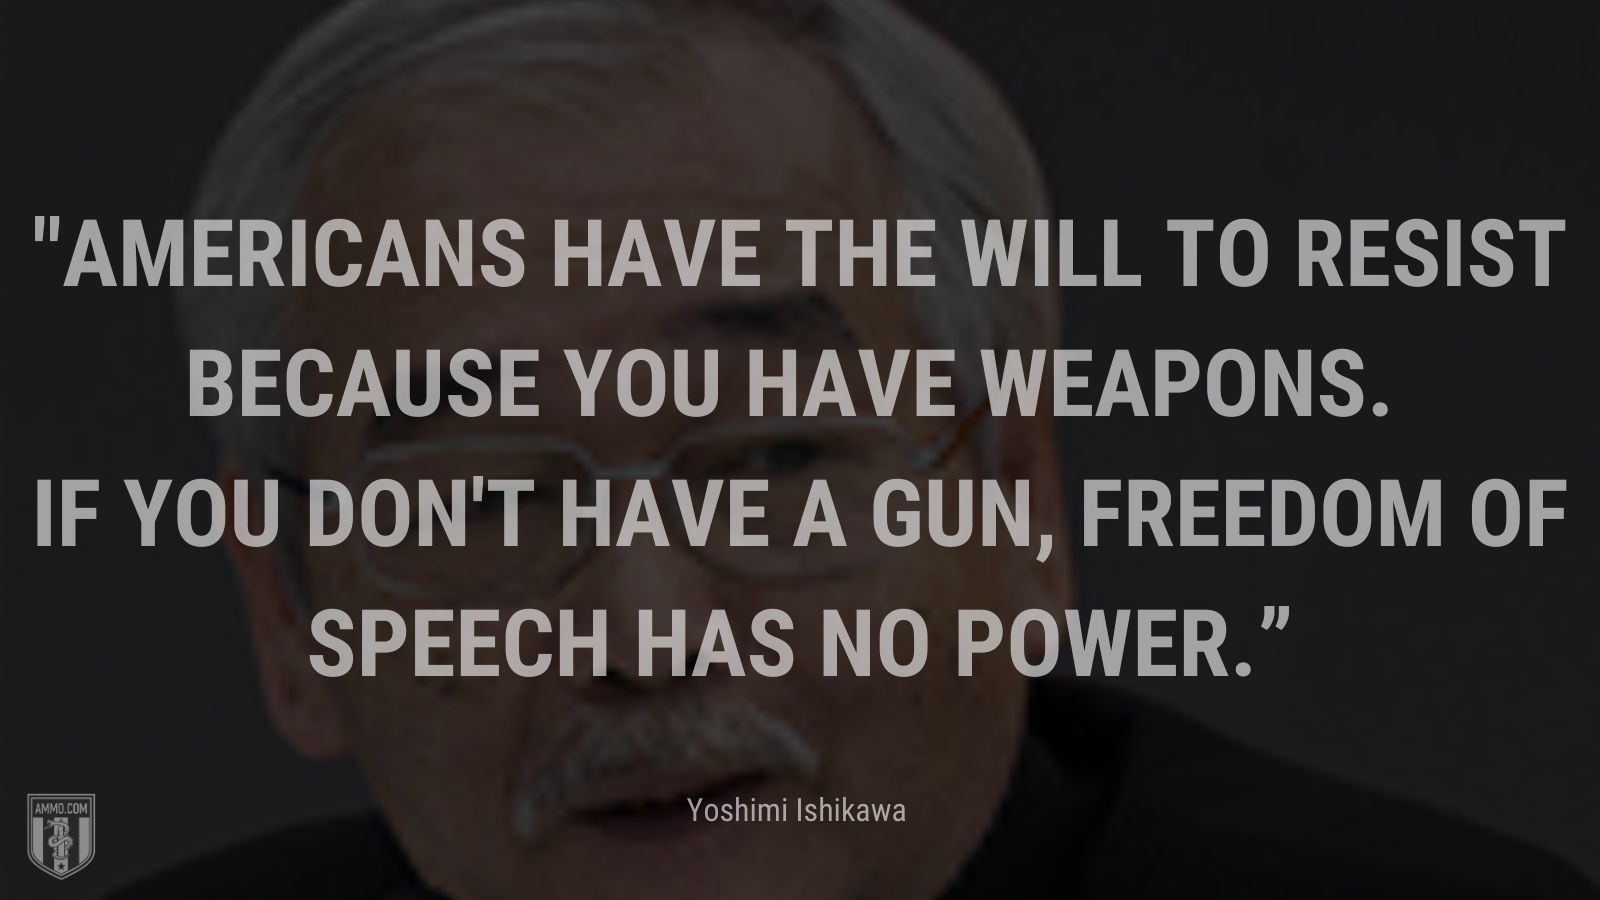 “Americans have the will to resist because you have weapons. If you don't have a gun, freedom of speech has no power” - Yoshimi Ishikawa